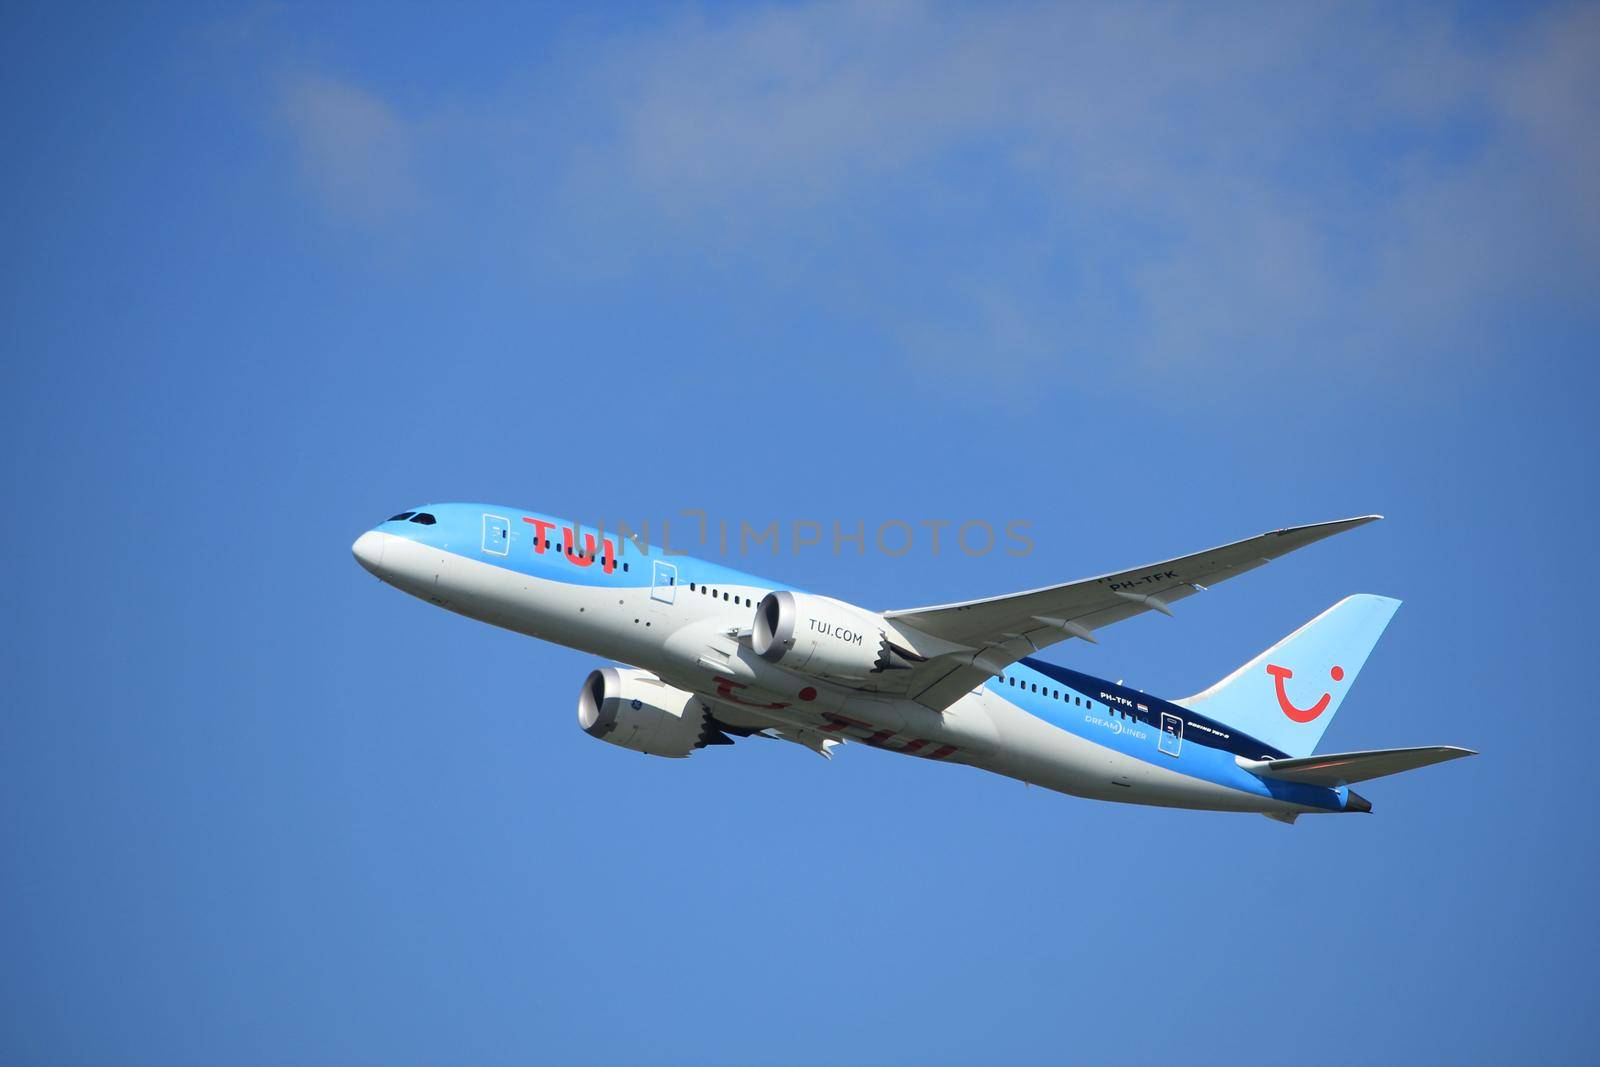 Amsterdam the Netherlands - September 23rd 2017:  PH-TFK TUI Airlines Netherlands Boeing 787-8 Dreamliner takeoff from Kaagbaan runway, Amsterdam Airport Schiphol